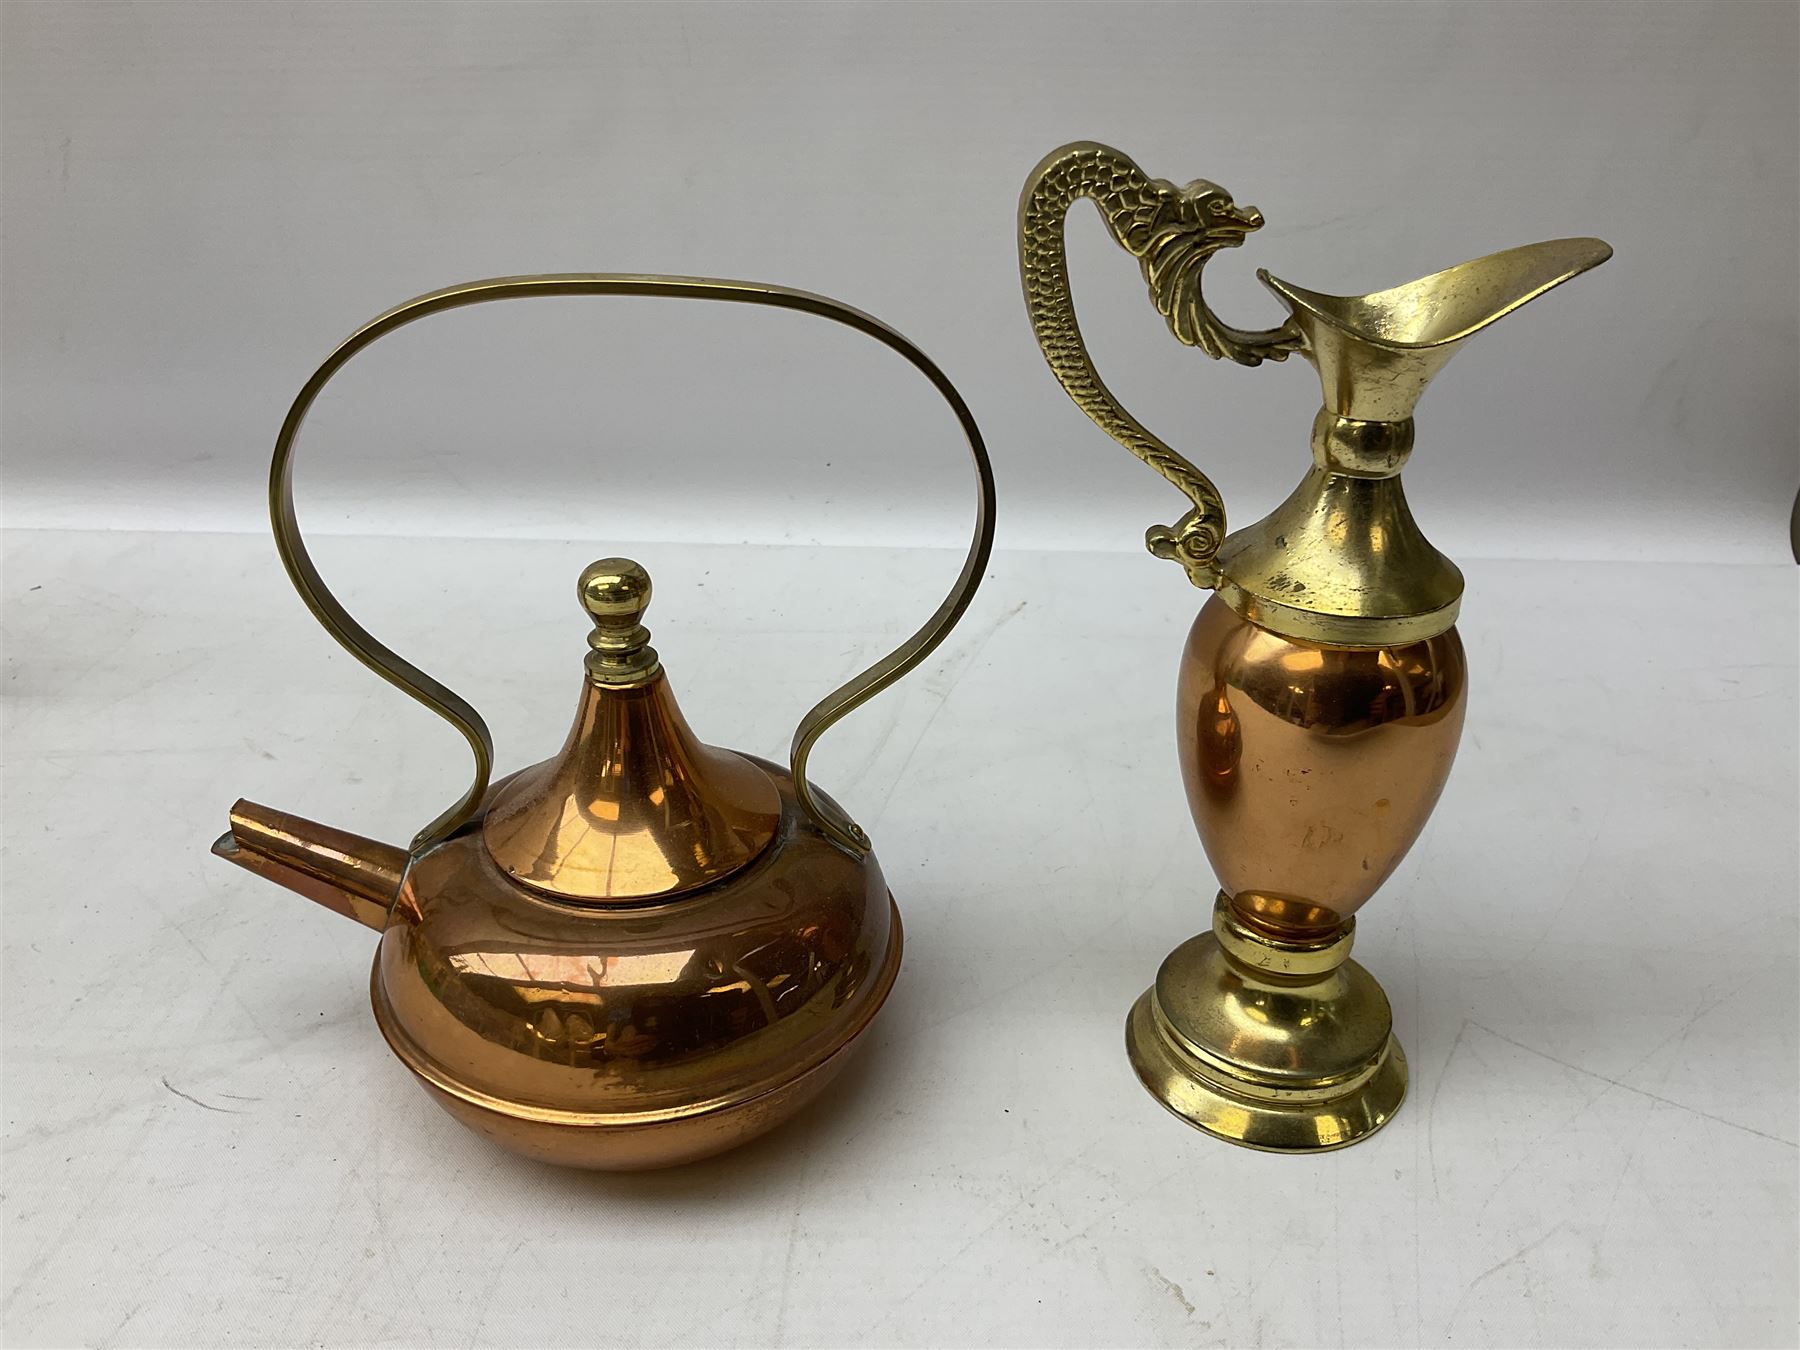 Ornate brass inkstand with ceramic inkwell - Image 9 of 12